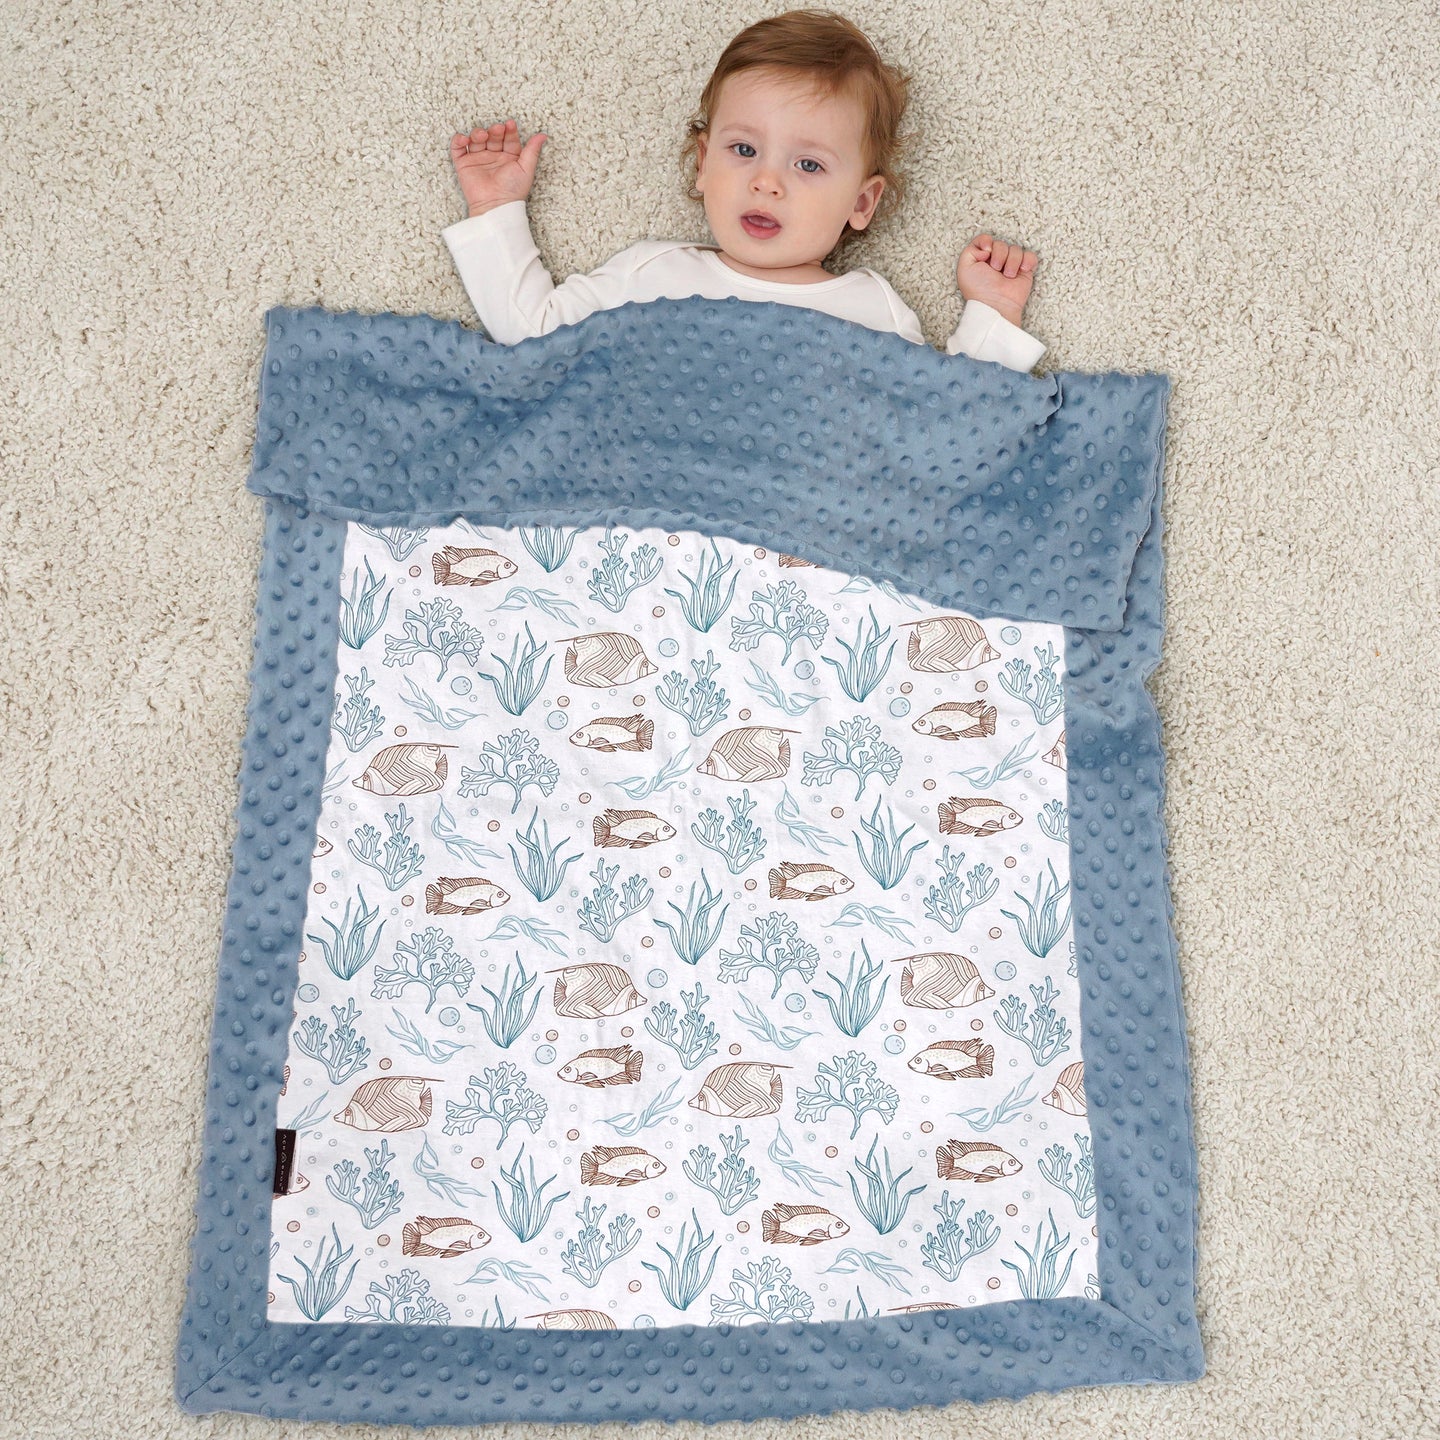 ACRABROS Baby Blankets Double Layer Dotted Backing 30X40 Inches,Ocean World